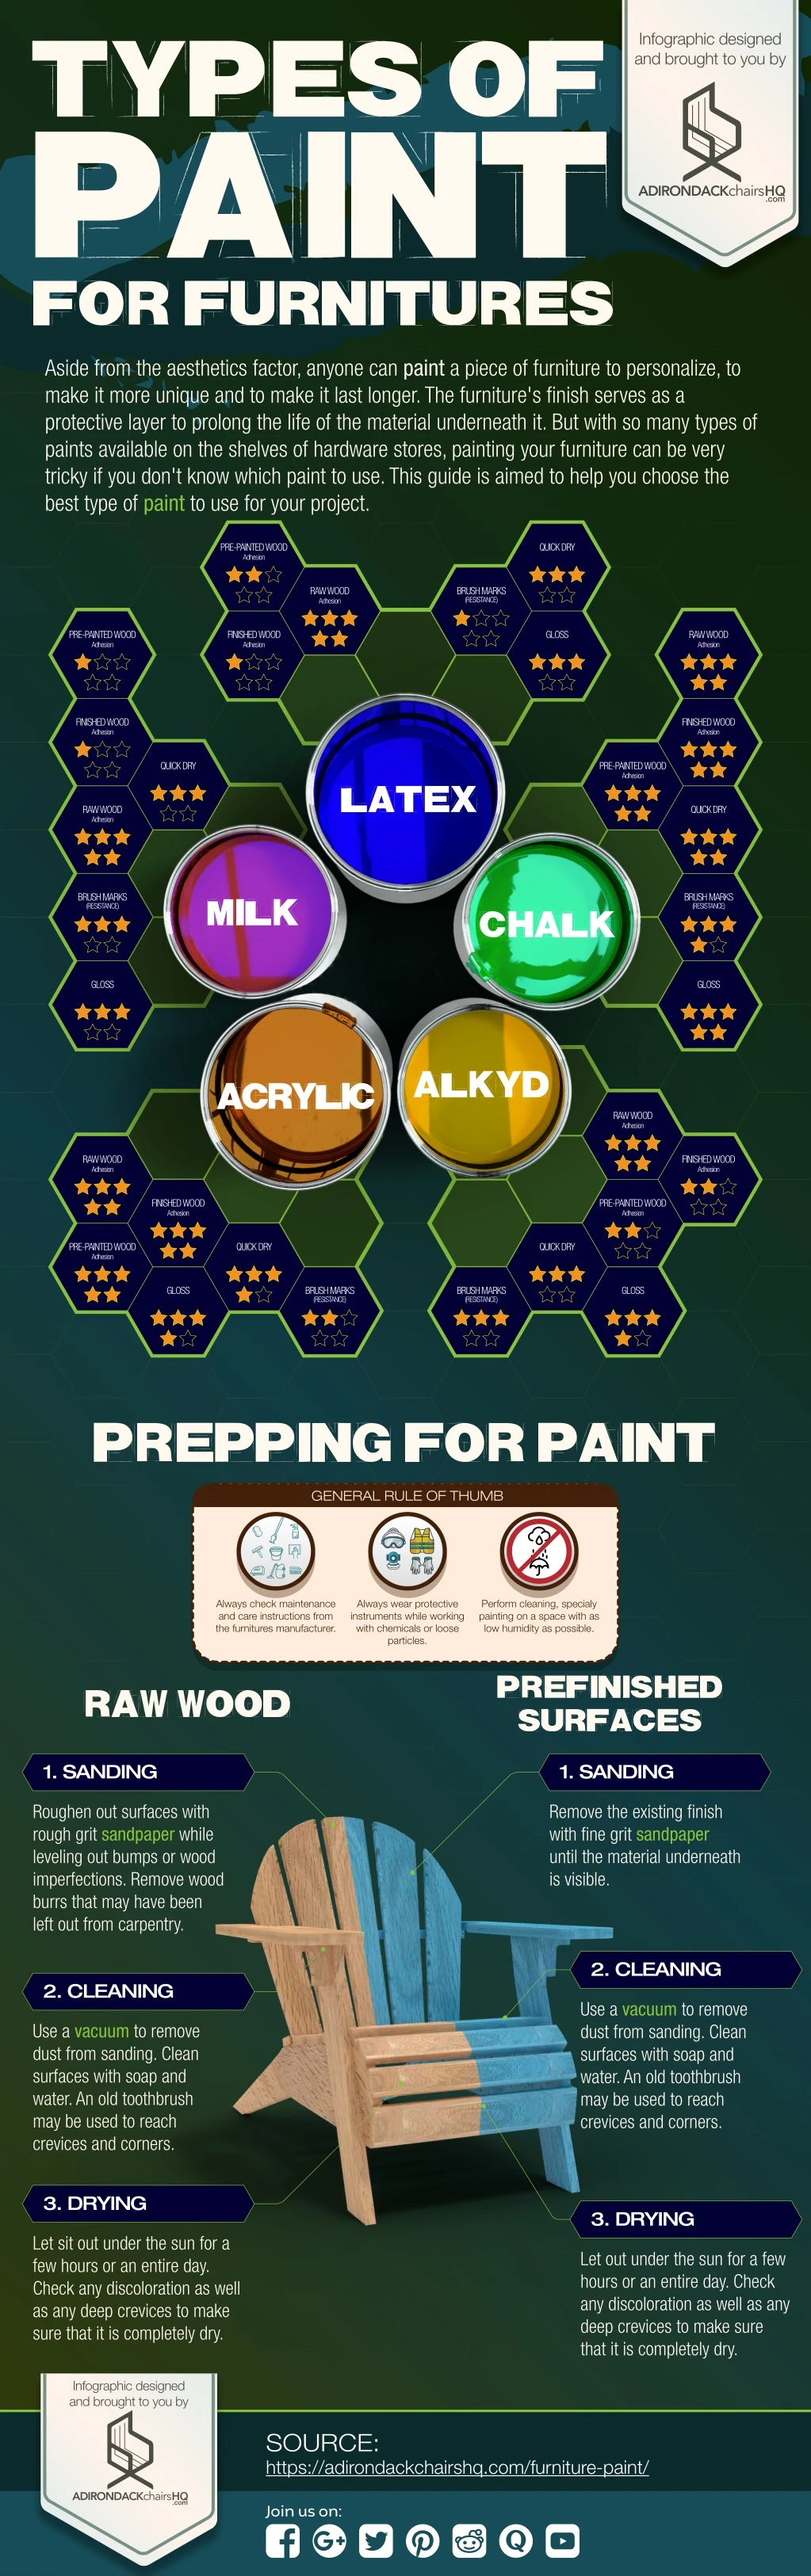 types of paint for furnitures